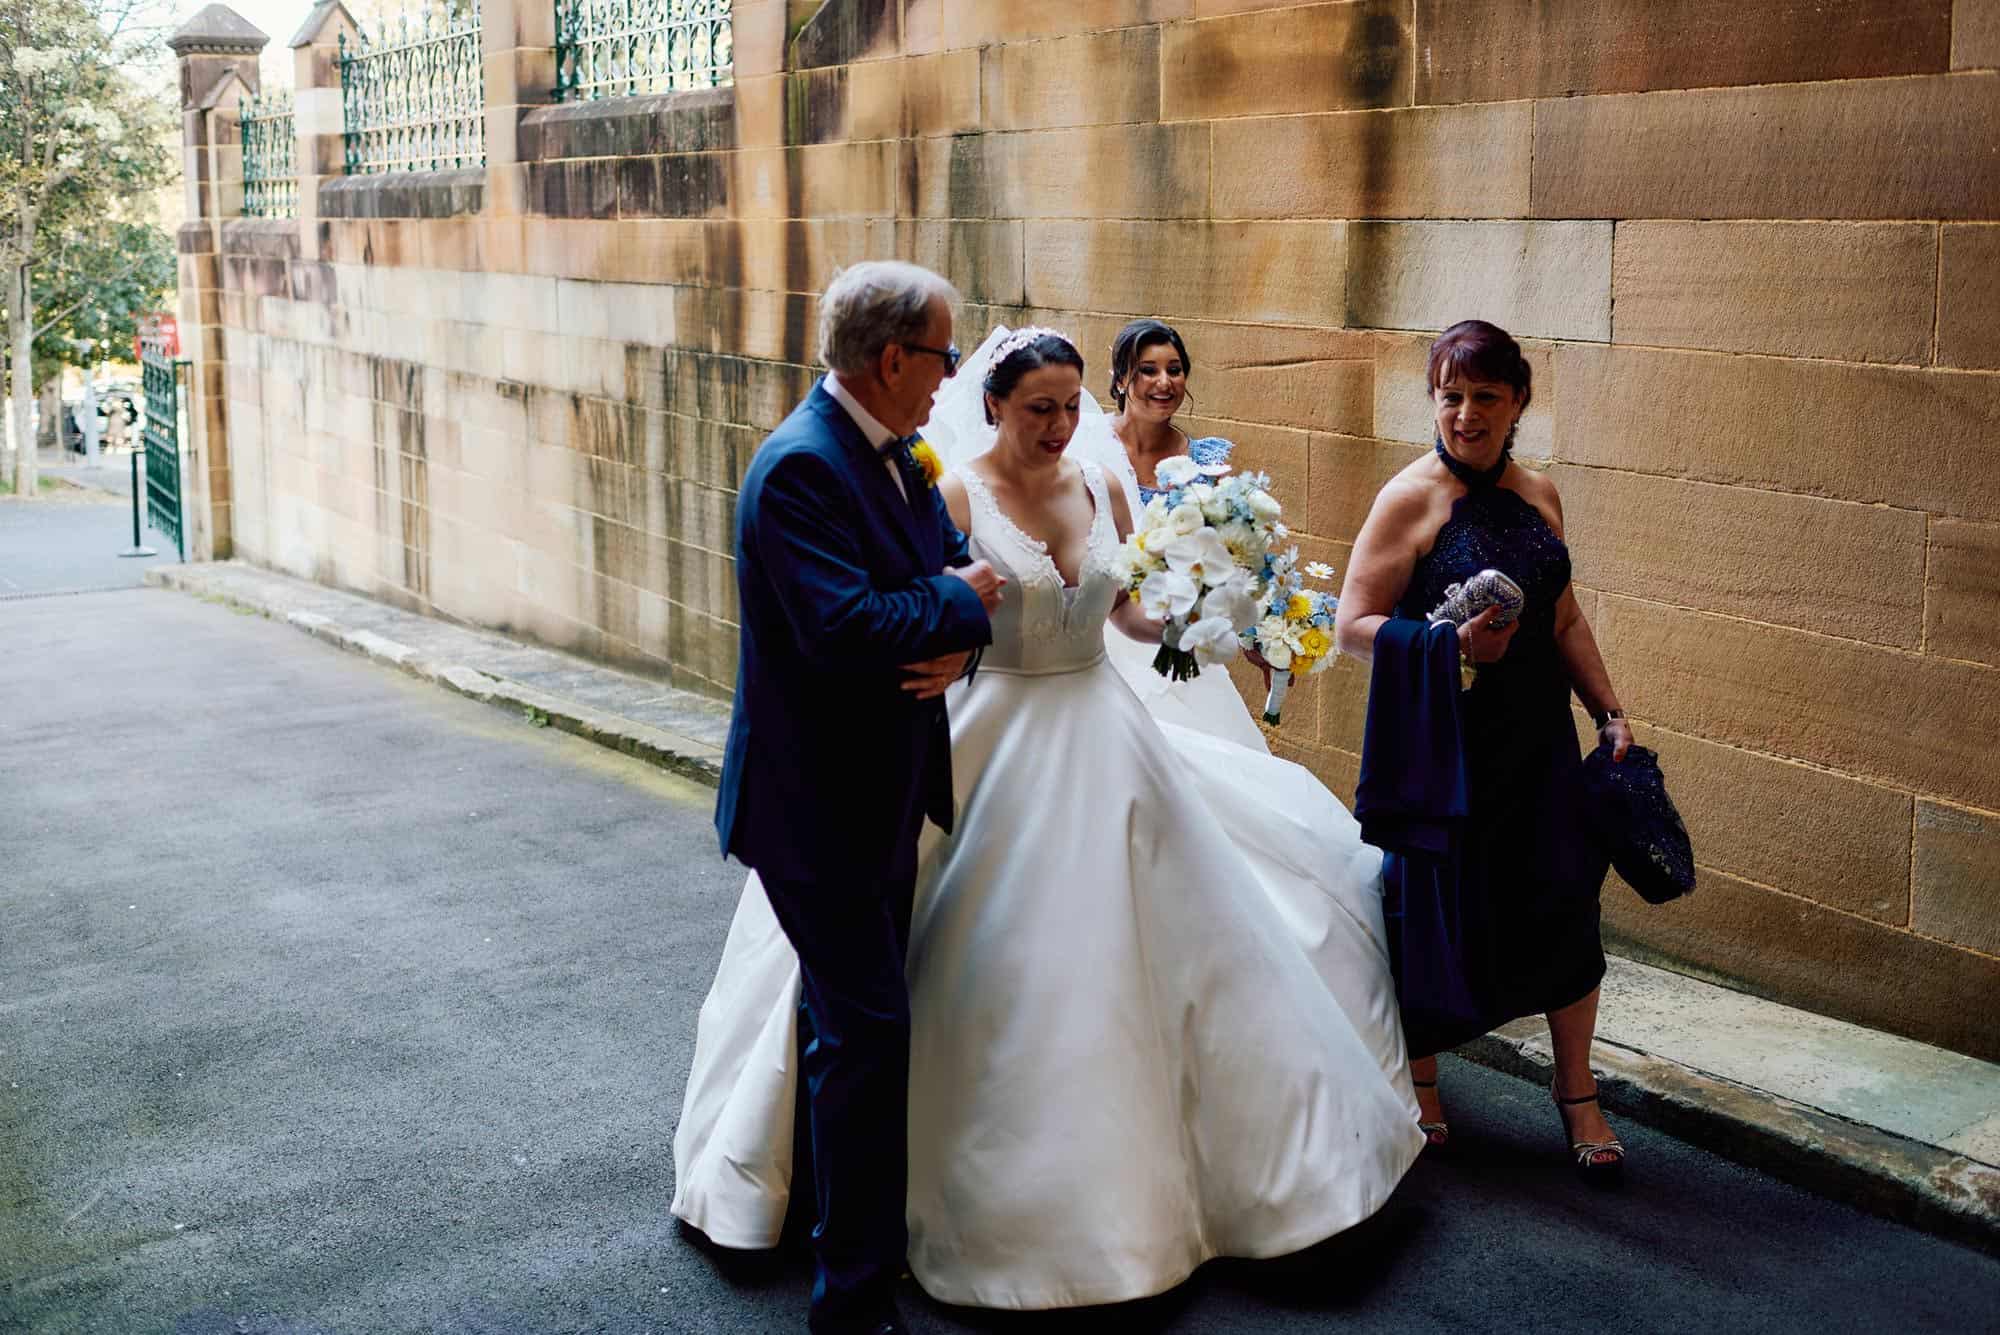 Heading into St Mary's Cathedral for her wedding